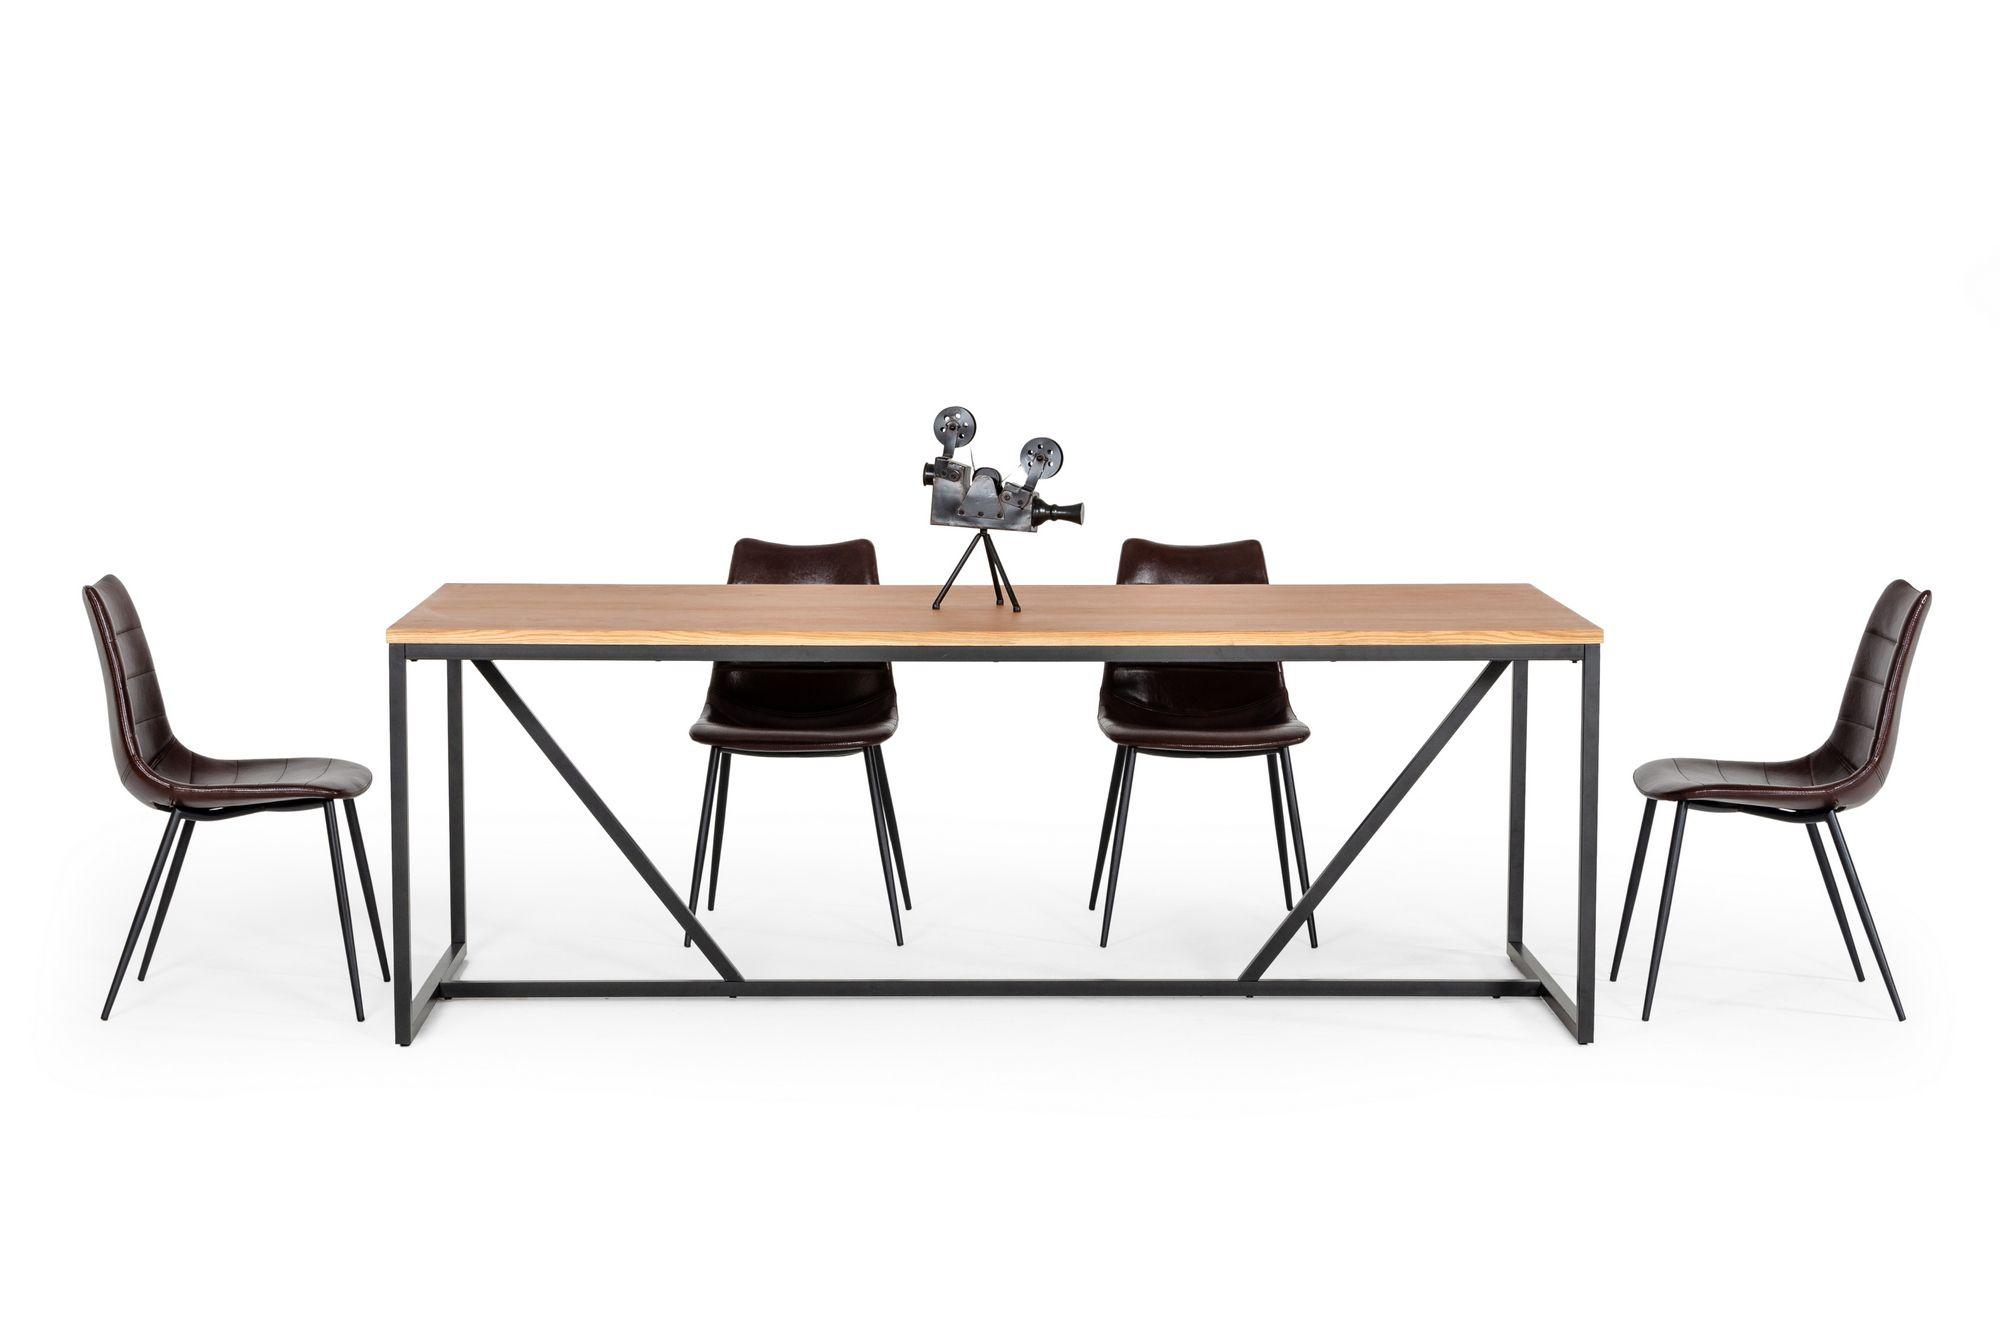 Contemporary, Modern Dining Room Set Fagan VGEDMD220005-5pcs in Oak, Brown Leather